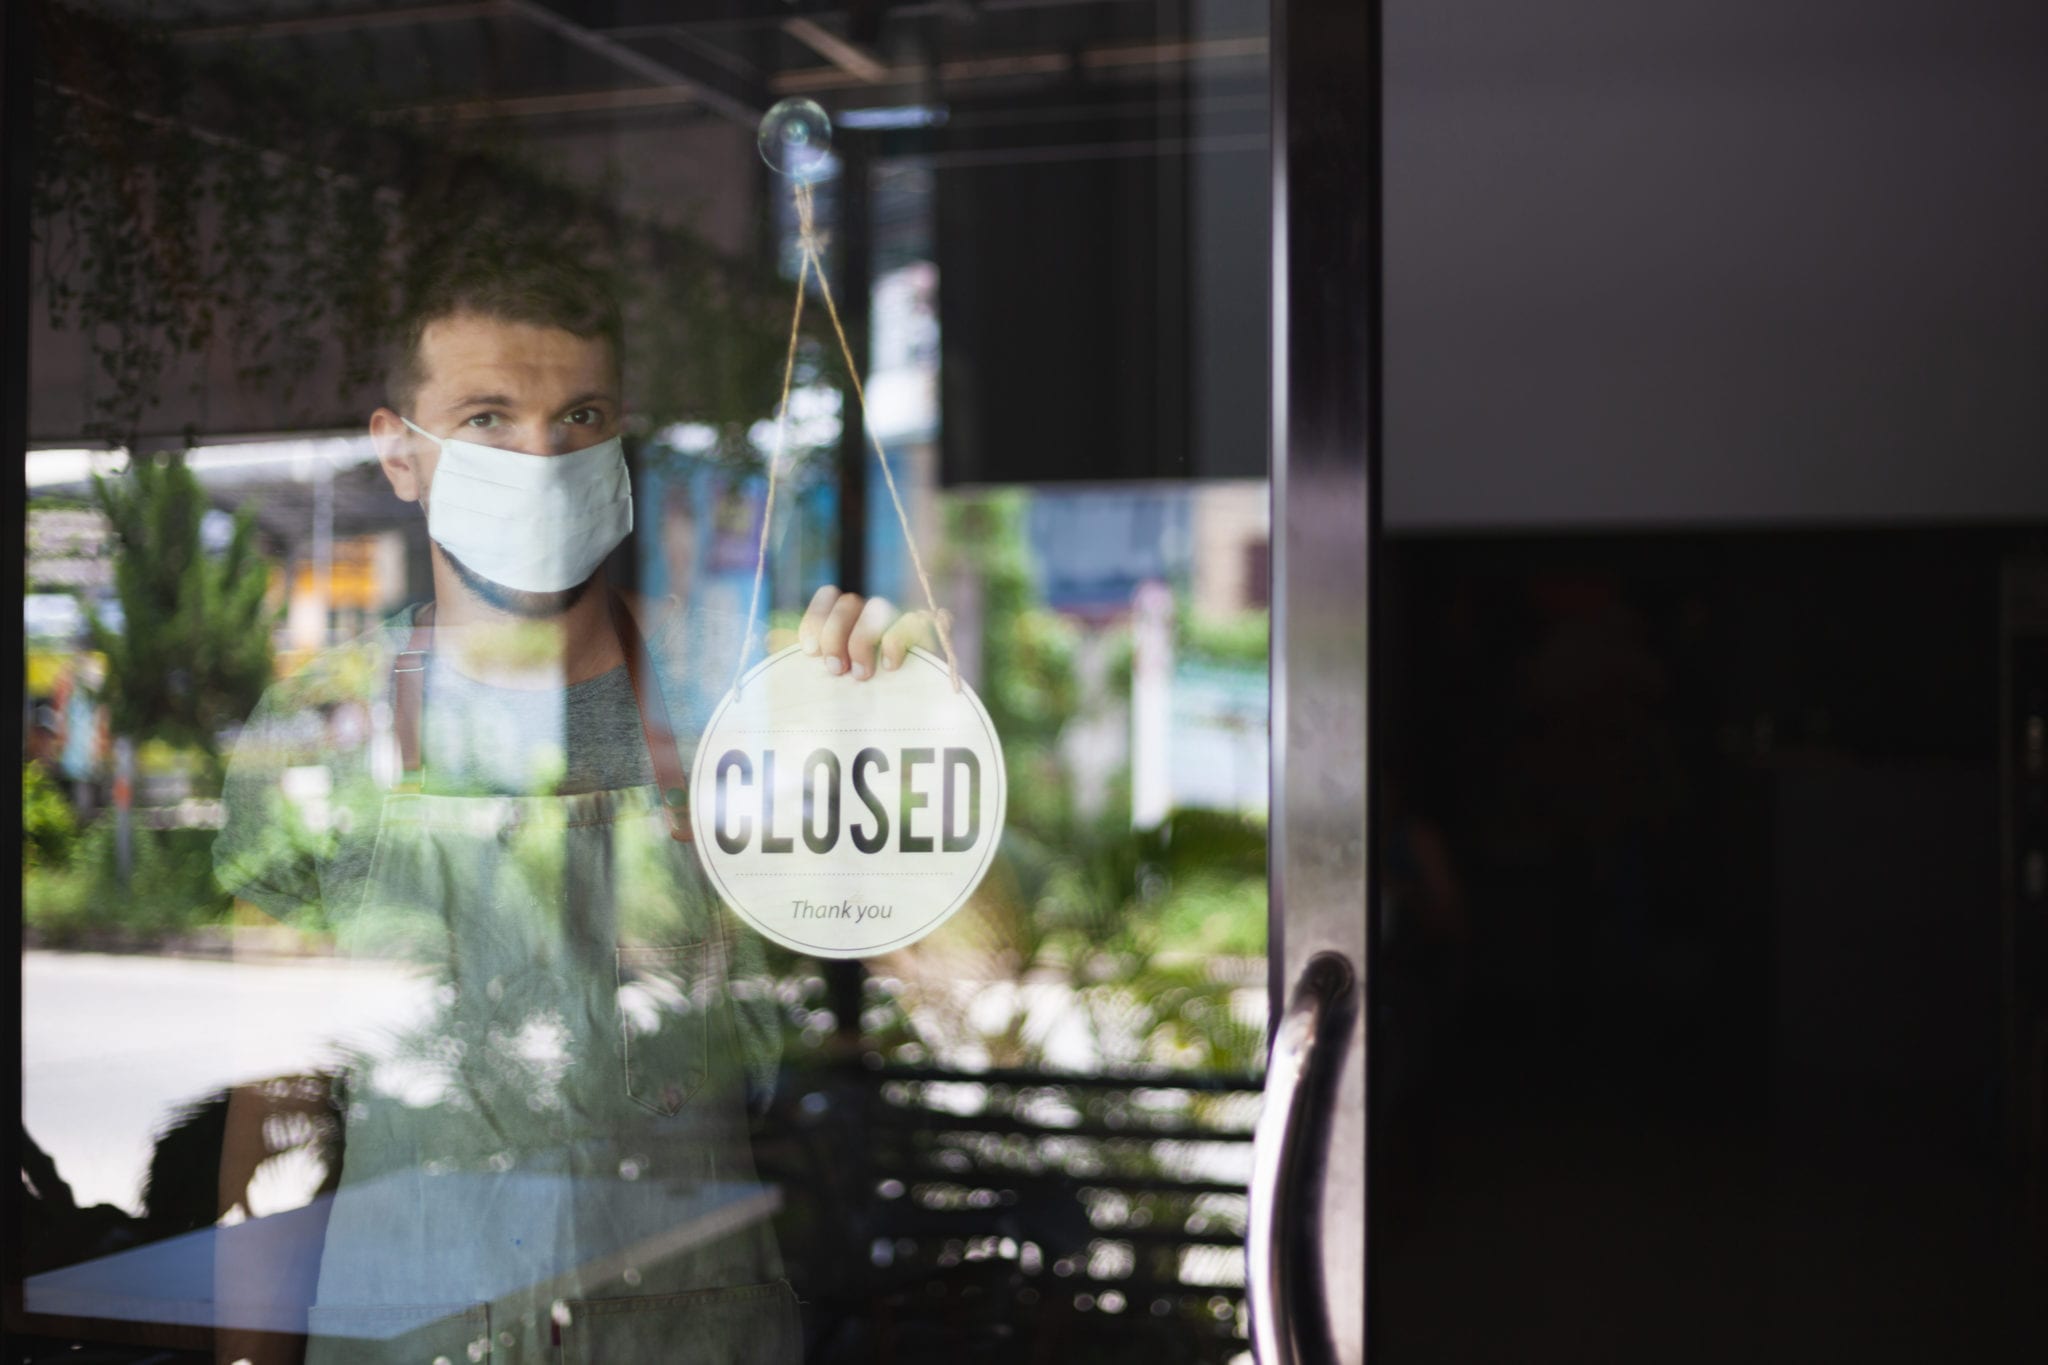 Chef in safety mask hanging up sign closed on restaurant door